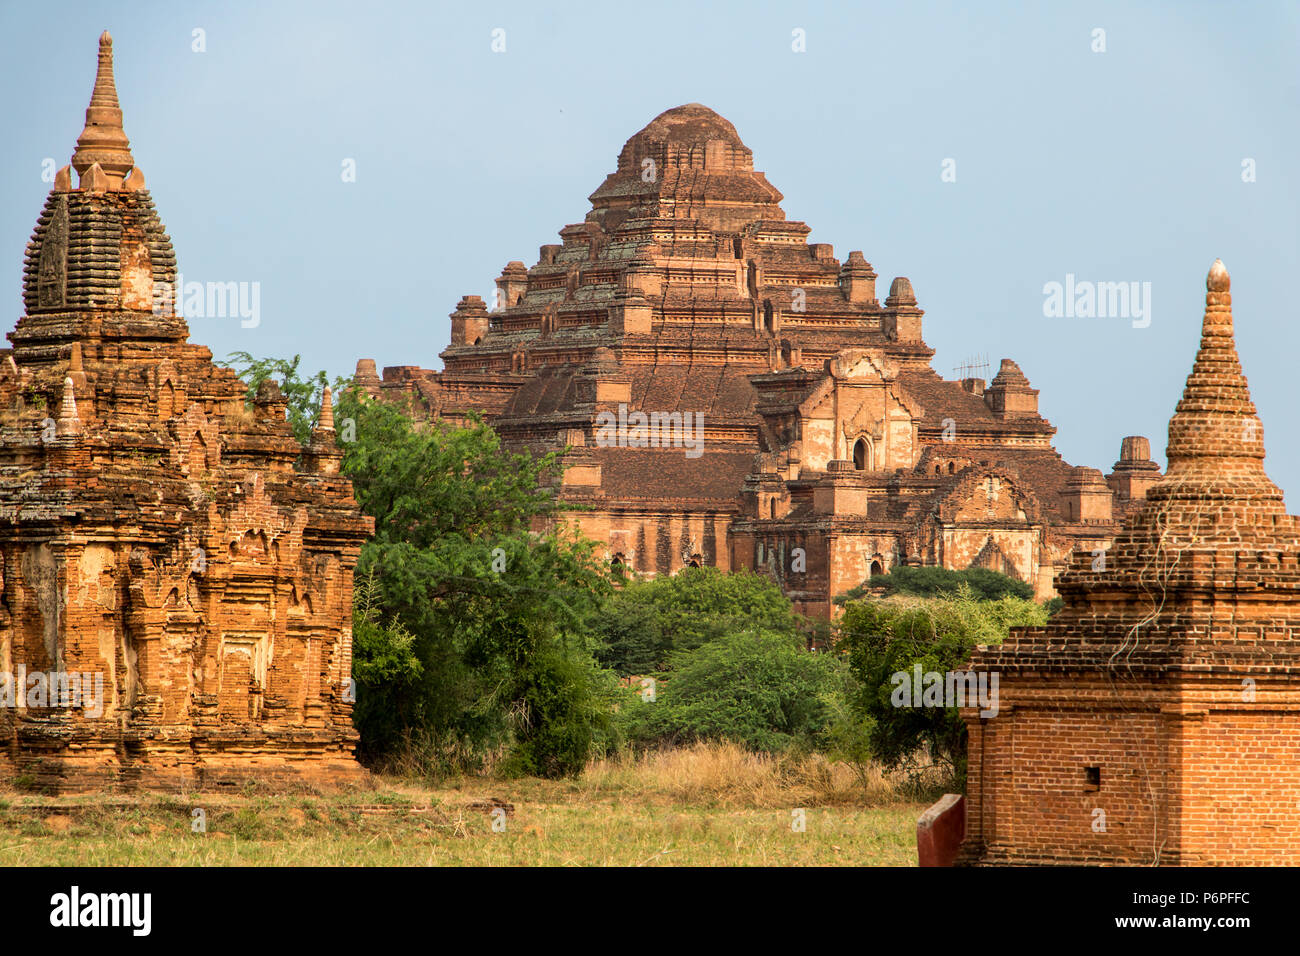 Myanmar temples in the Archaeological Zone, Bagan, Myanmar. Historical Buddhist temples in Bagan, Burma. Stock Photo